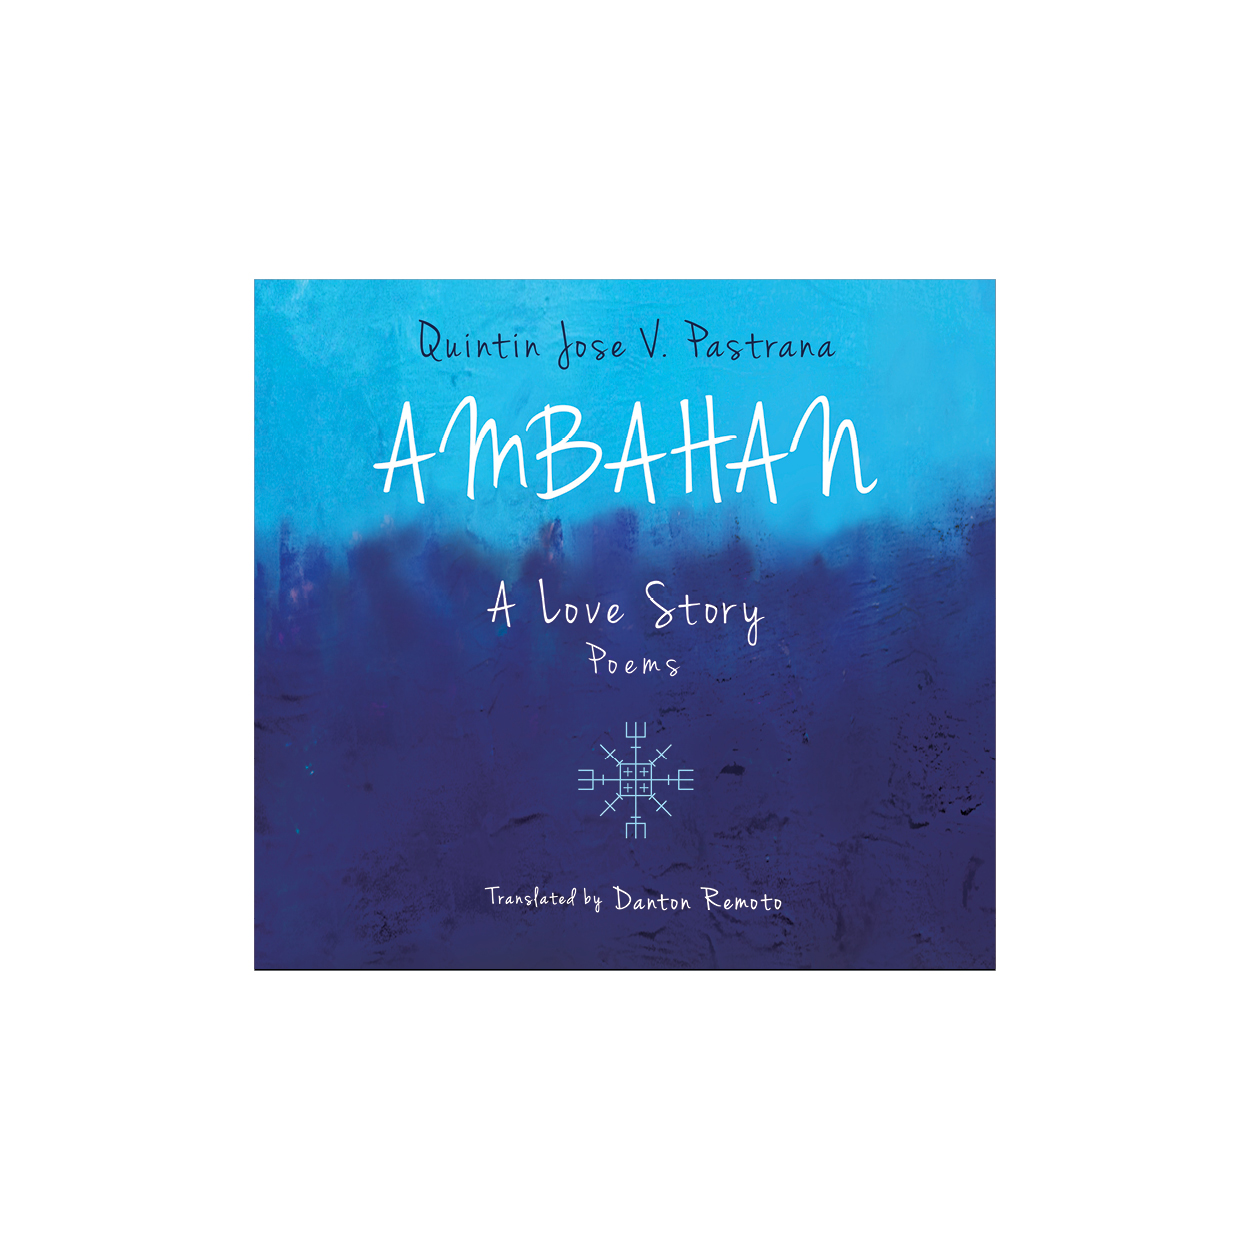 Ambahan: A Love Story by Quintin Jose V. Pastrana from the Retail Shop of Manila House Private Club Inc